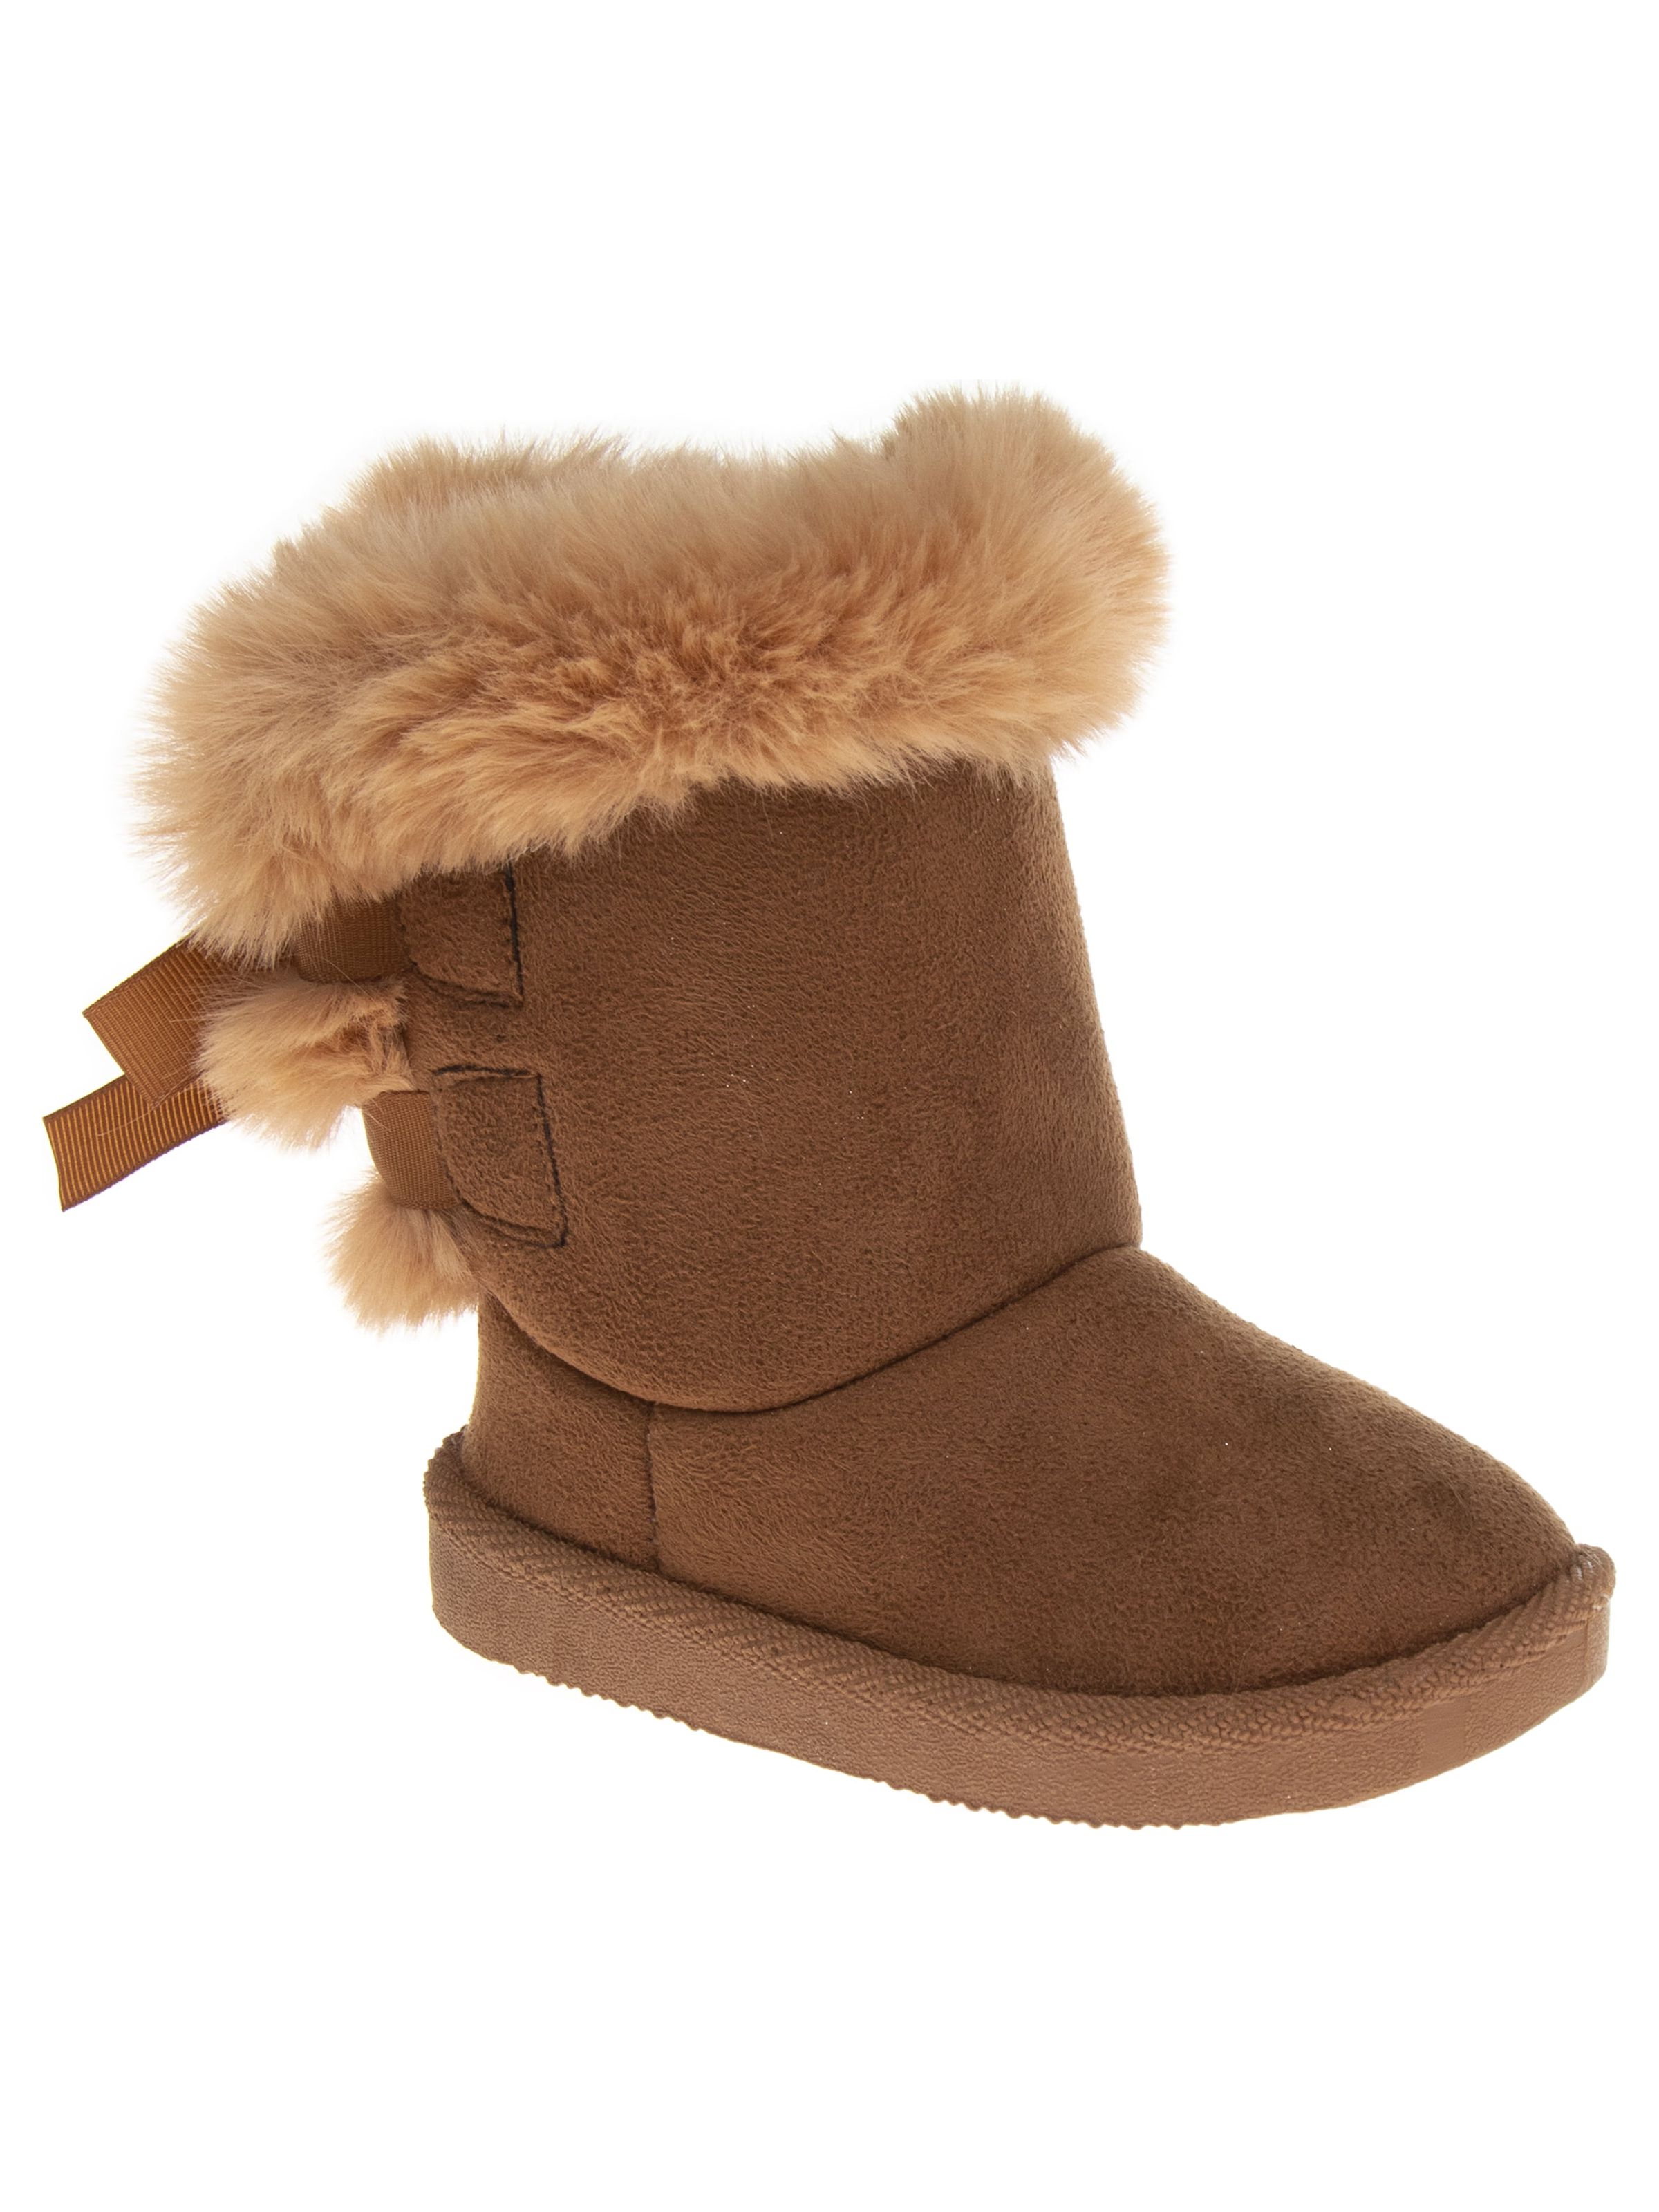 Josmo Toddler & Big Girls Faux Shearling Bow Boots - image 1 of 5